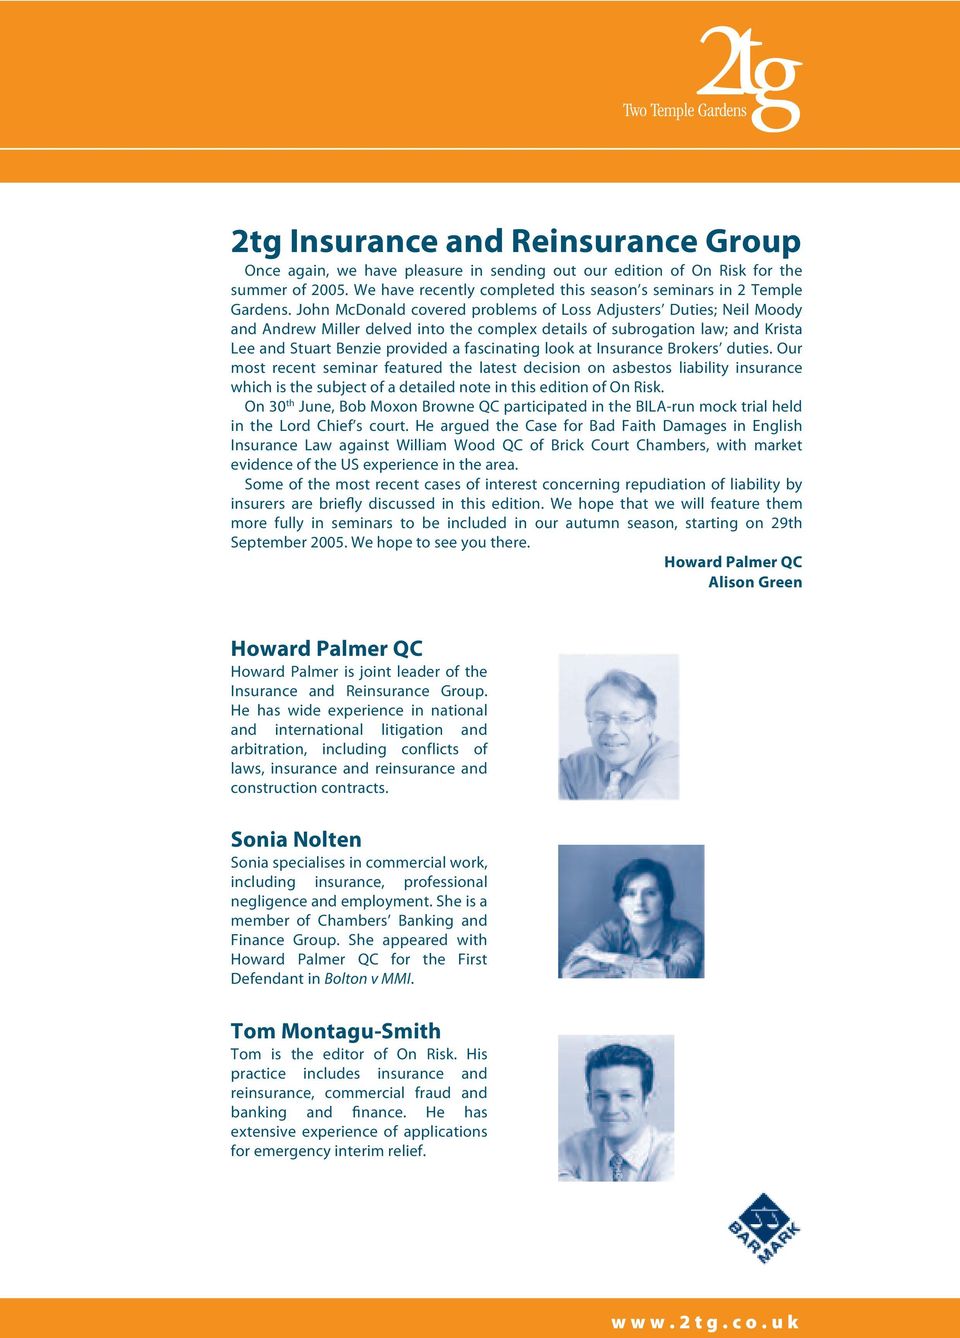 at Insurance Brokers duties. Our most recent seminar featured the latest decision on asbestos liability insurance which is the subject of a detailed note in this edition of On Risk.